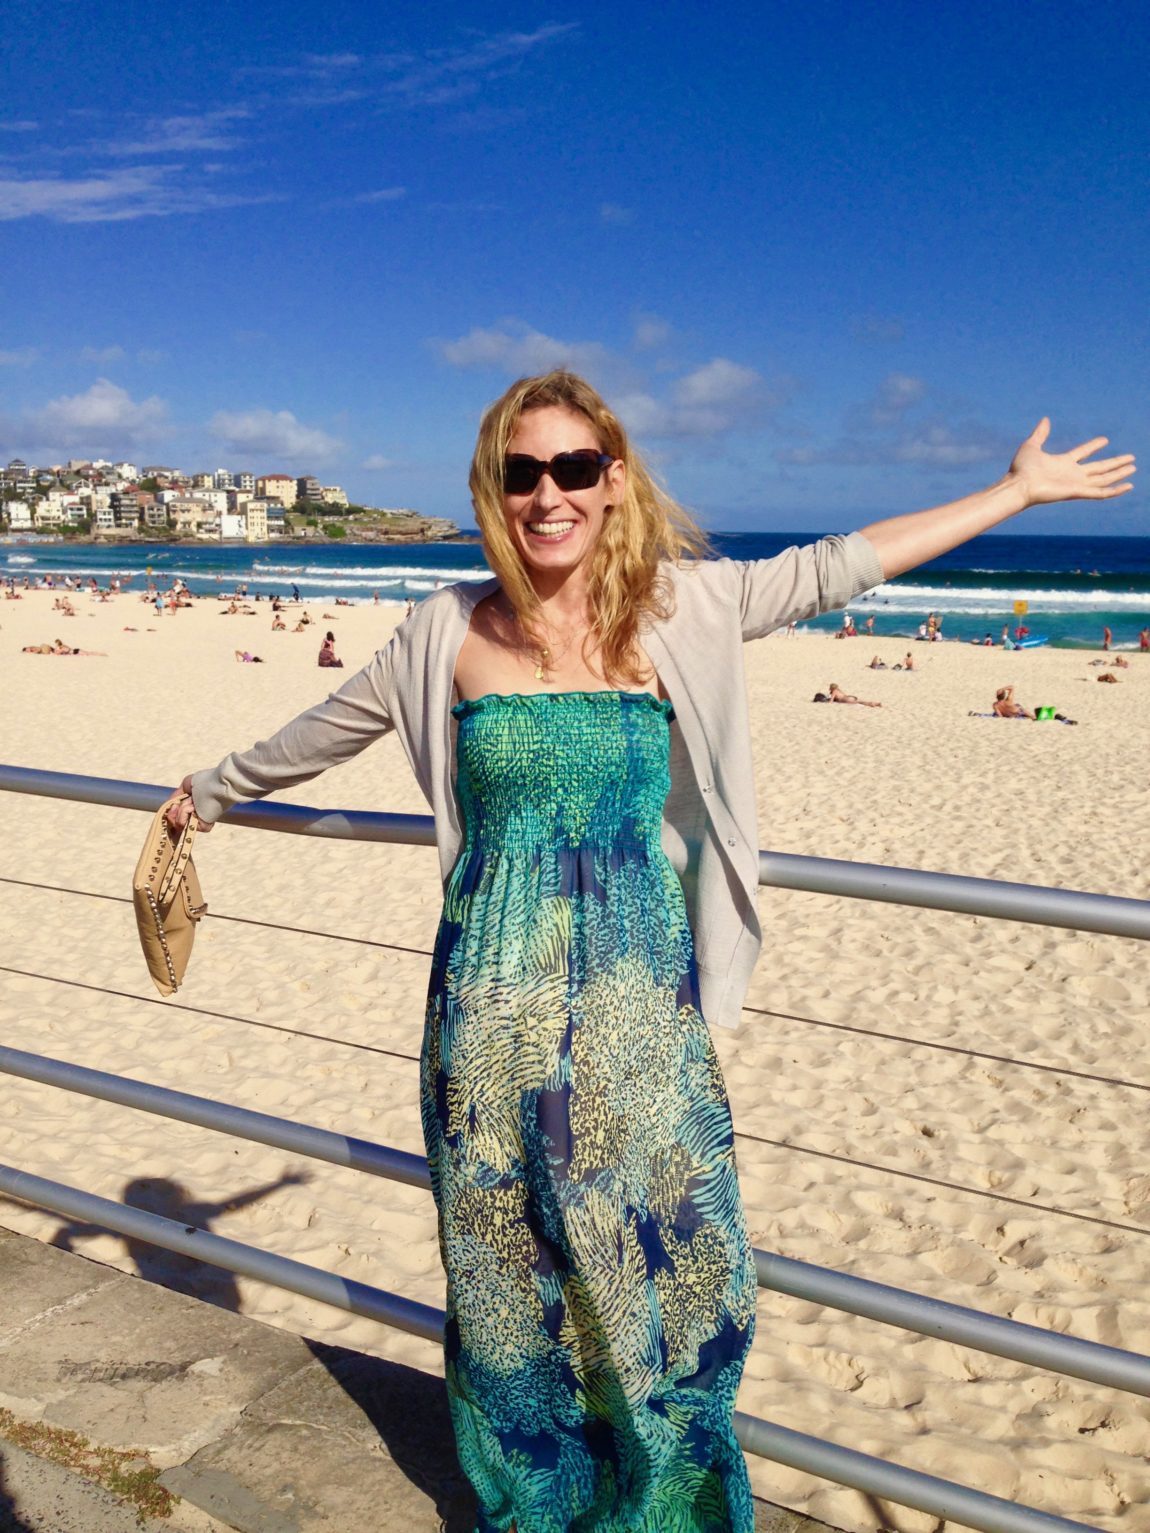 Merry shows her happiness to be at Bondi Beach